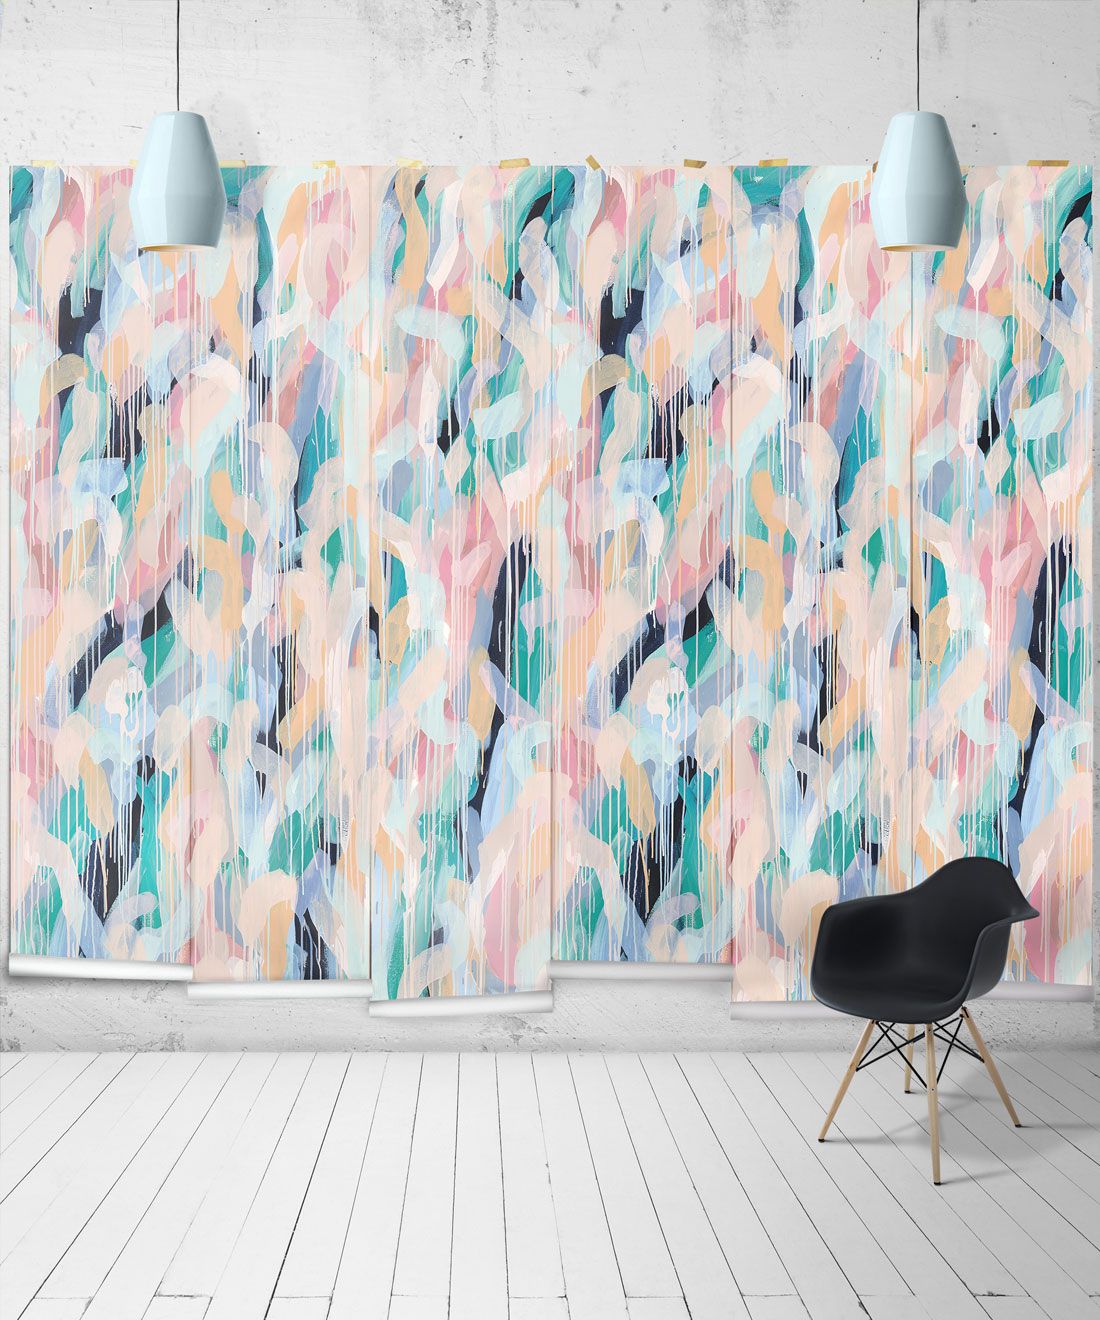 Blue Moon Wallpaper • Colourful Painterly Wallpaper • Tiff Manuell • Abstract Expressionist Wallpaper • Wide Insitu